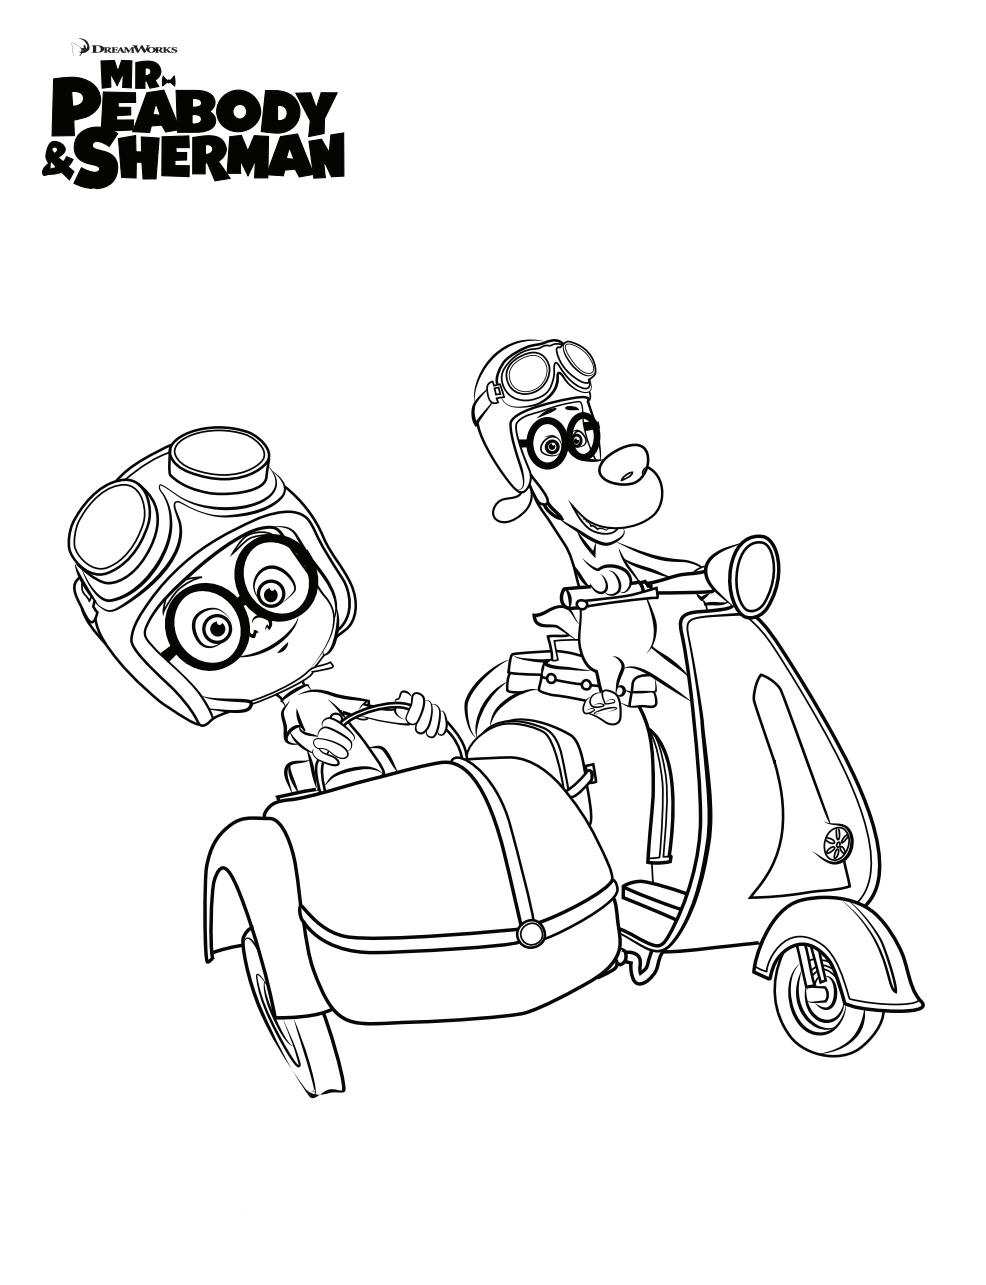 Mr Peabody And Sherman On A Motorcycle Coloring Page